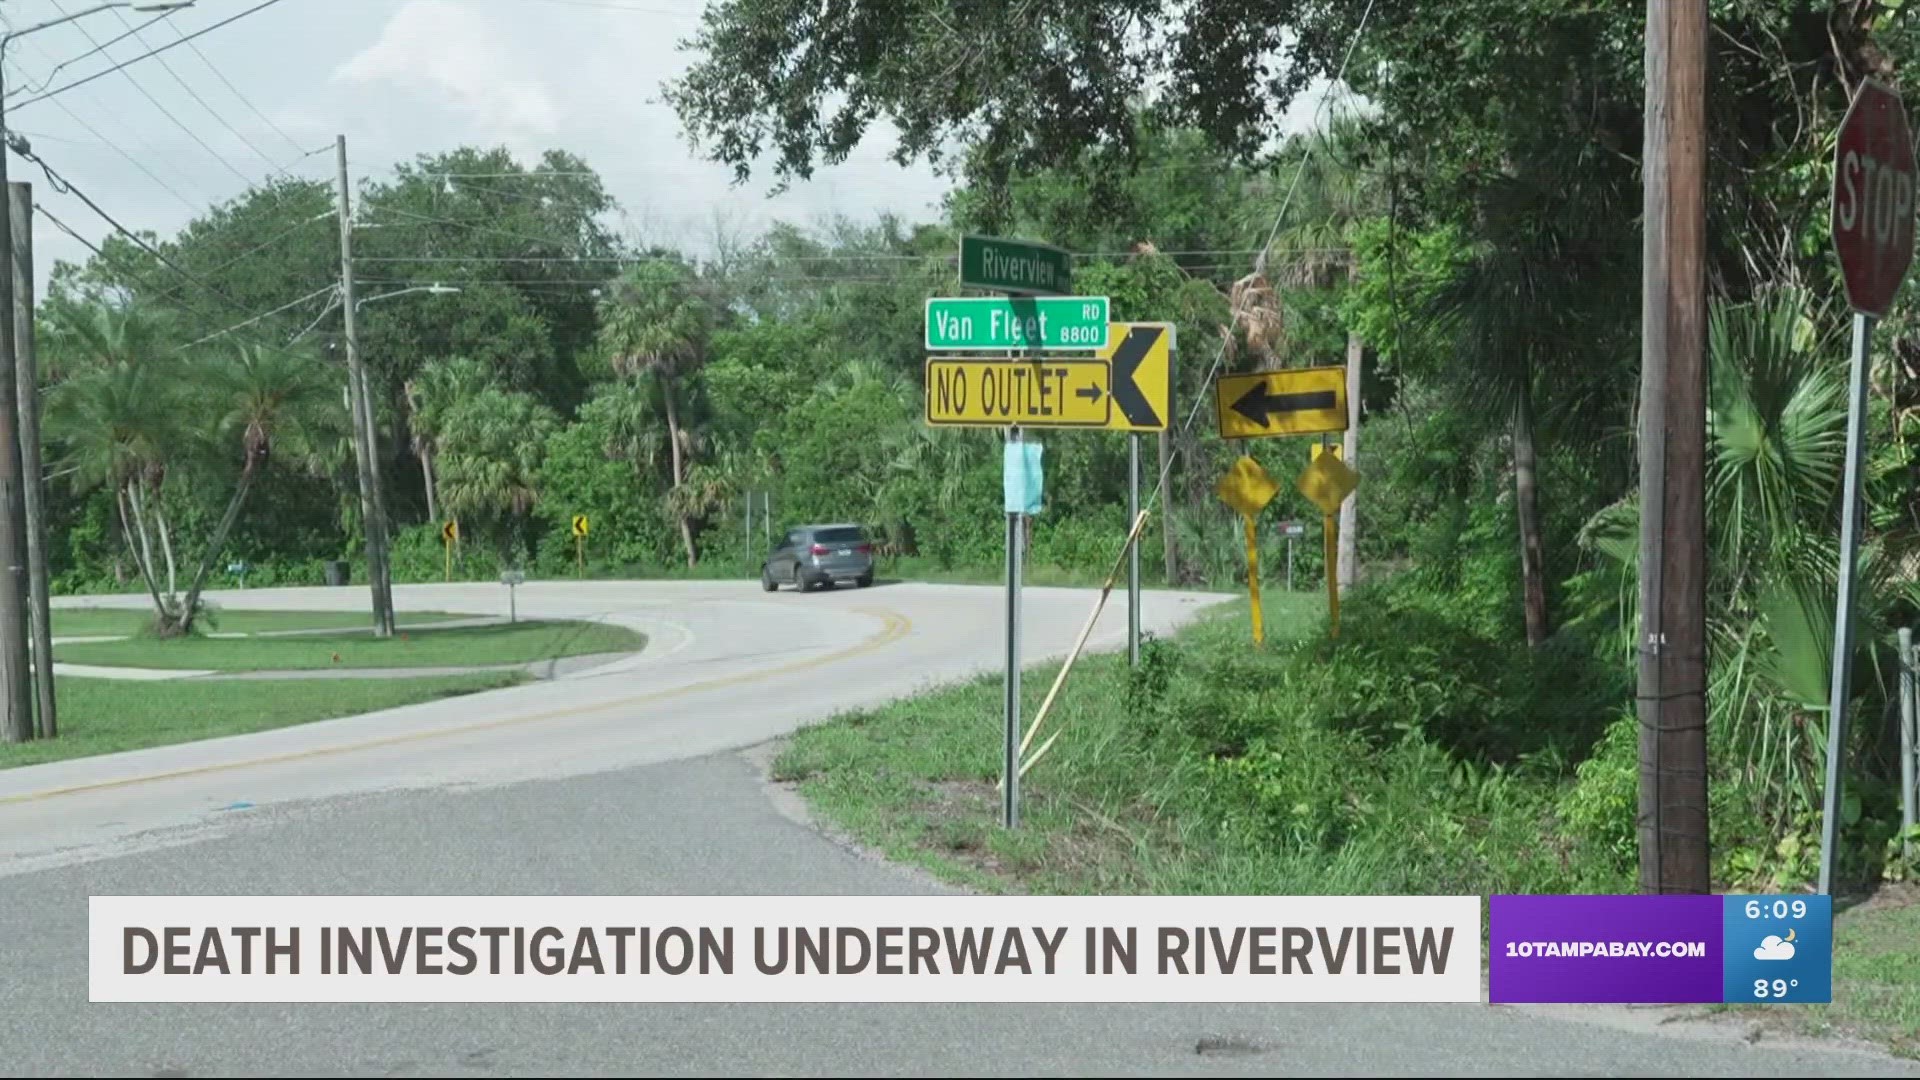 The body was found around 7:30 a.m. in the area of Riverview Drive, deputies said in a news release.